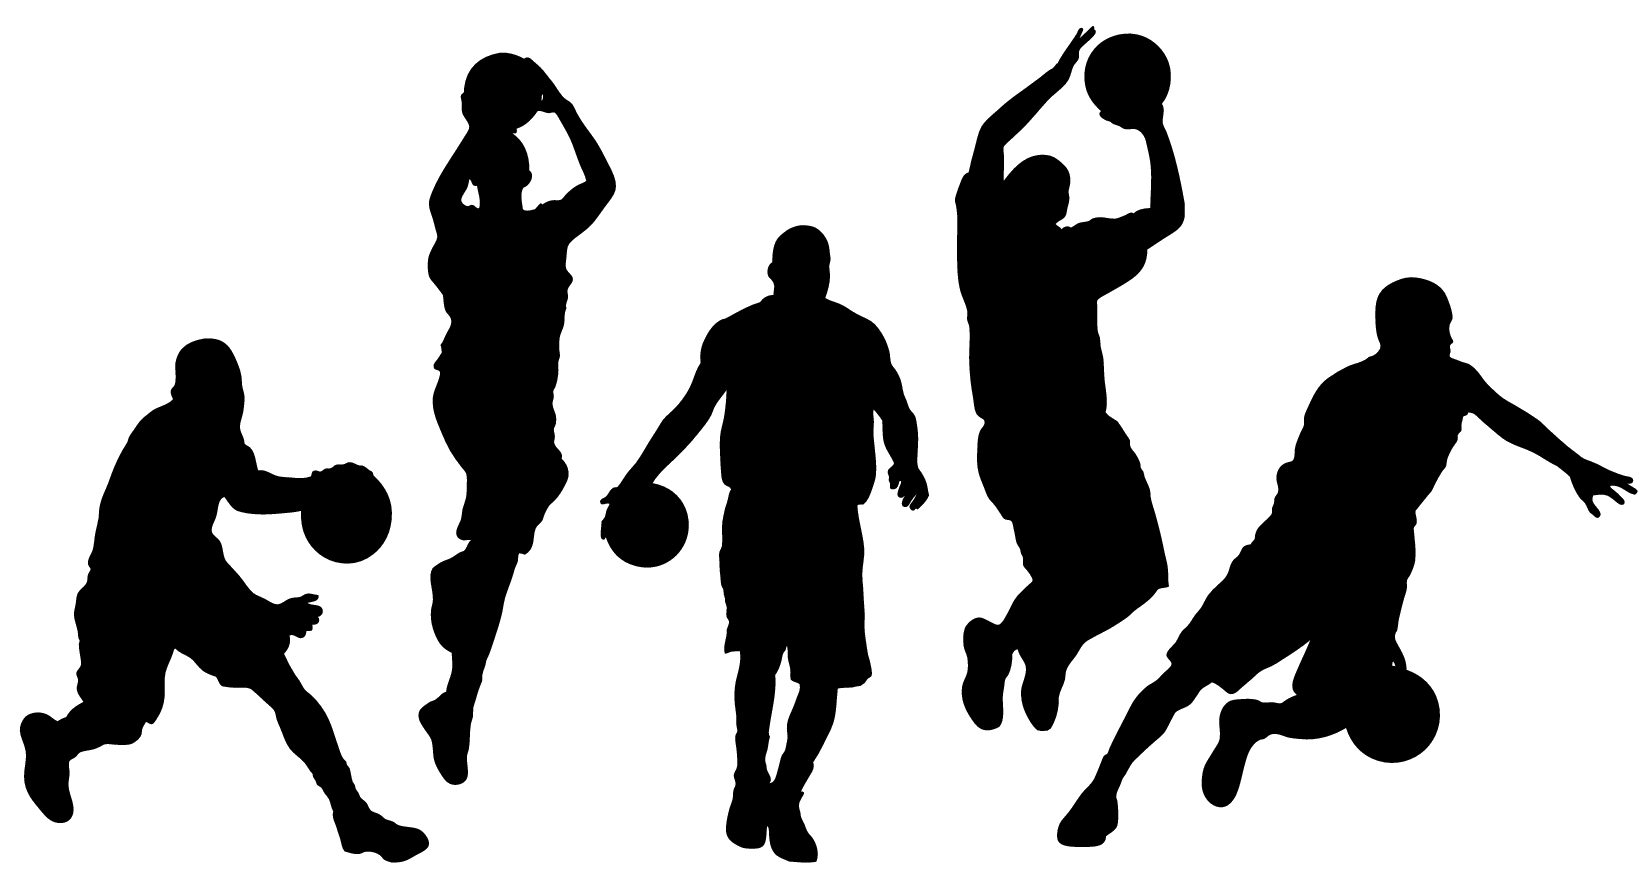 Free Basketball People Cliparts, Download Free Clip Art, Free Clip Art